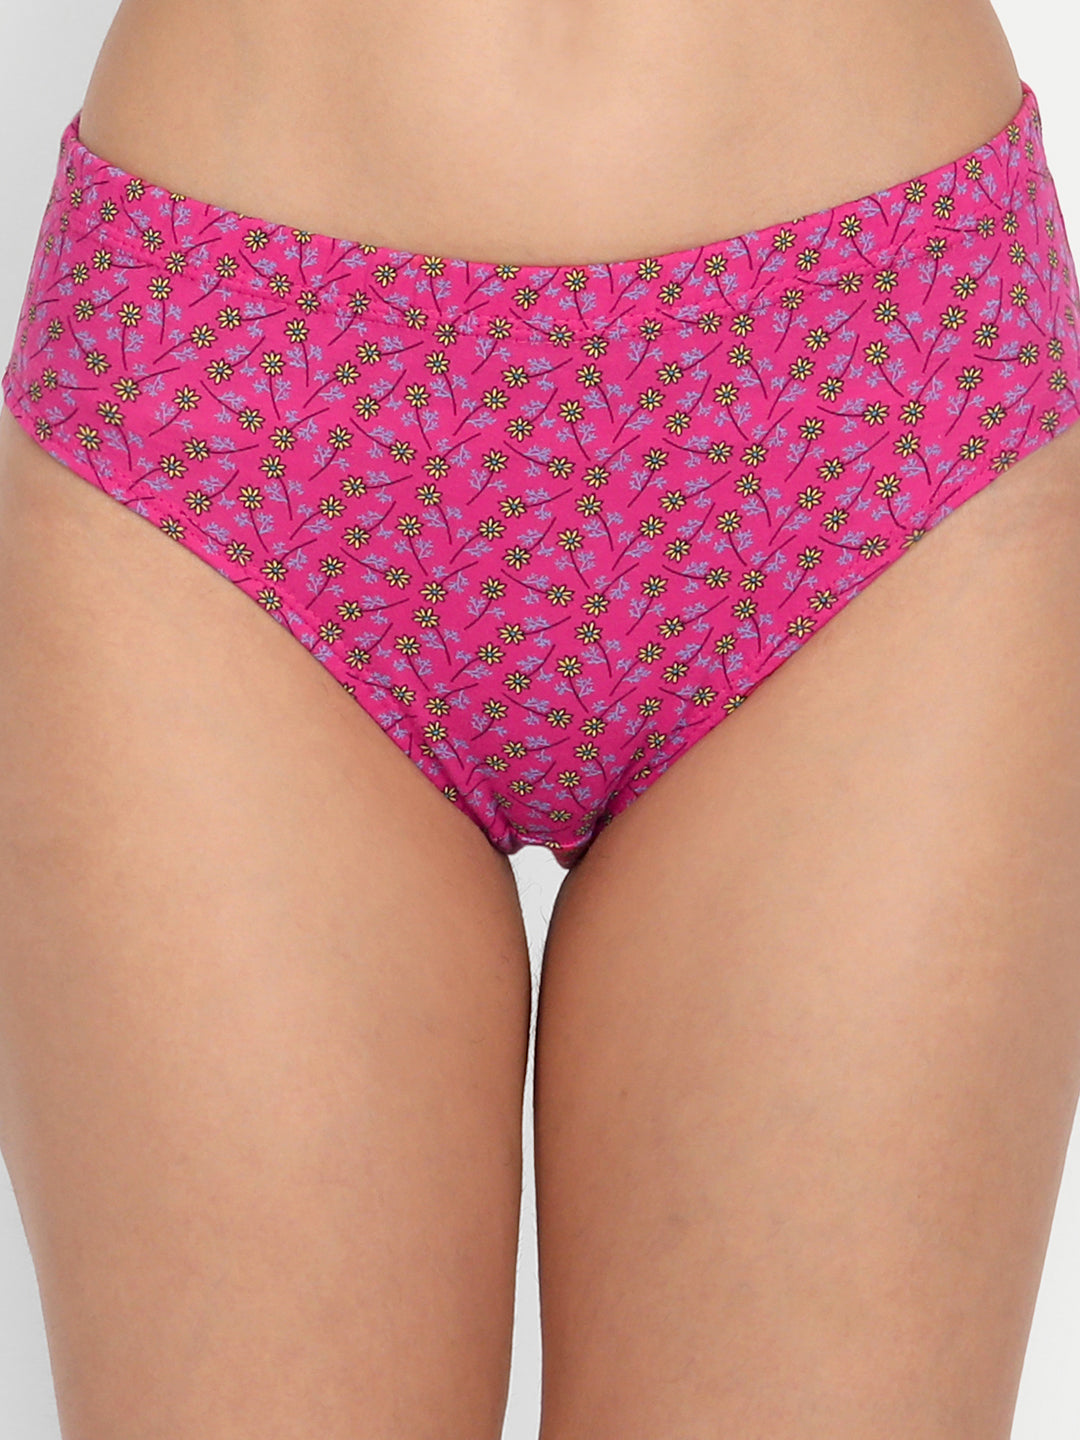 Triumph Red Printed Panty 5339285.htm - Buy Triumph Red Printed Panty  5339285.htm online in India